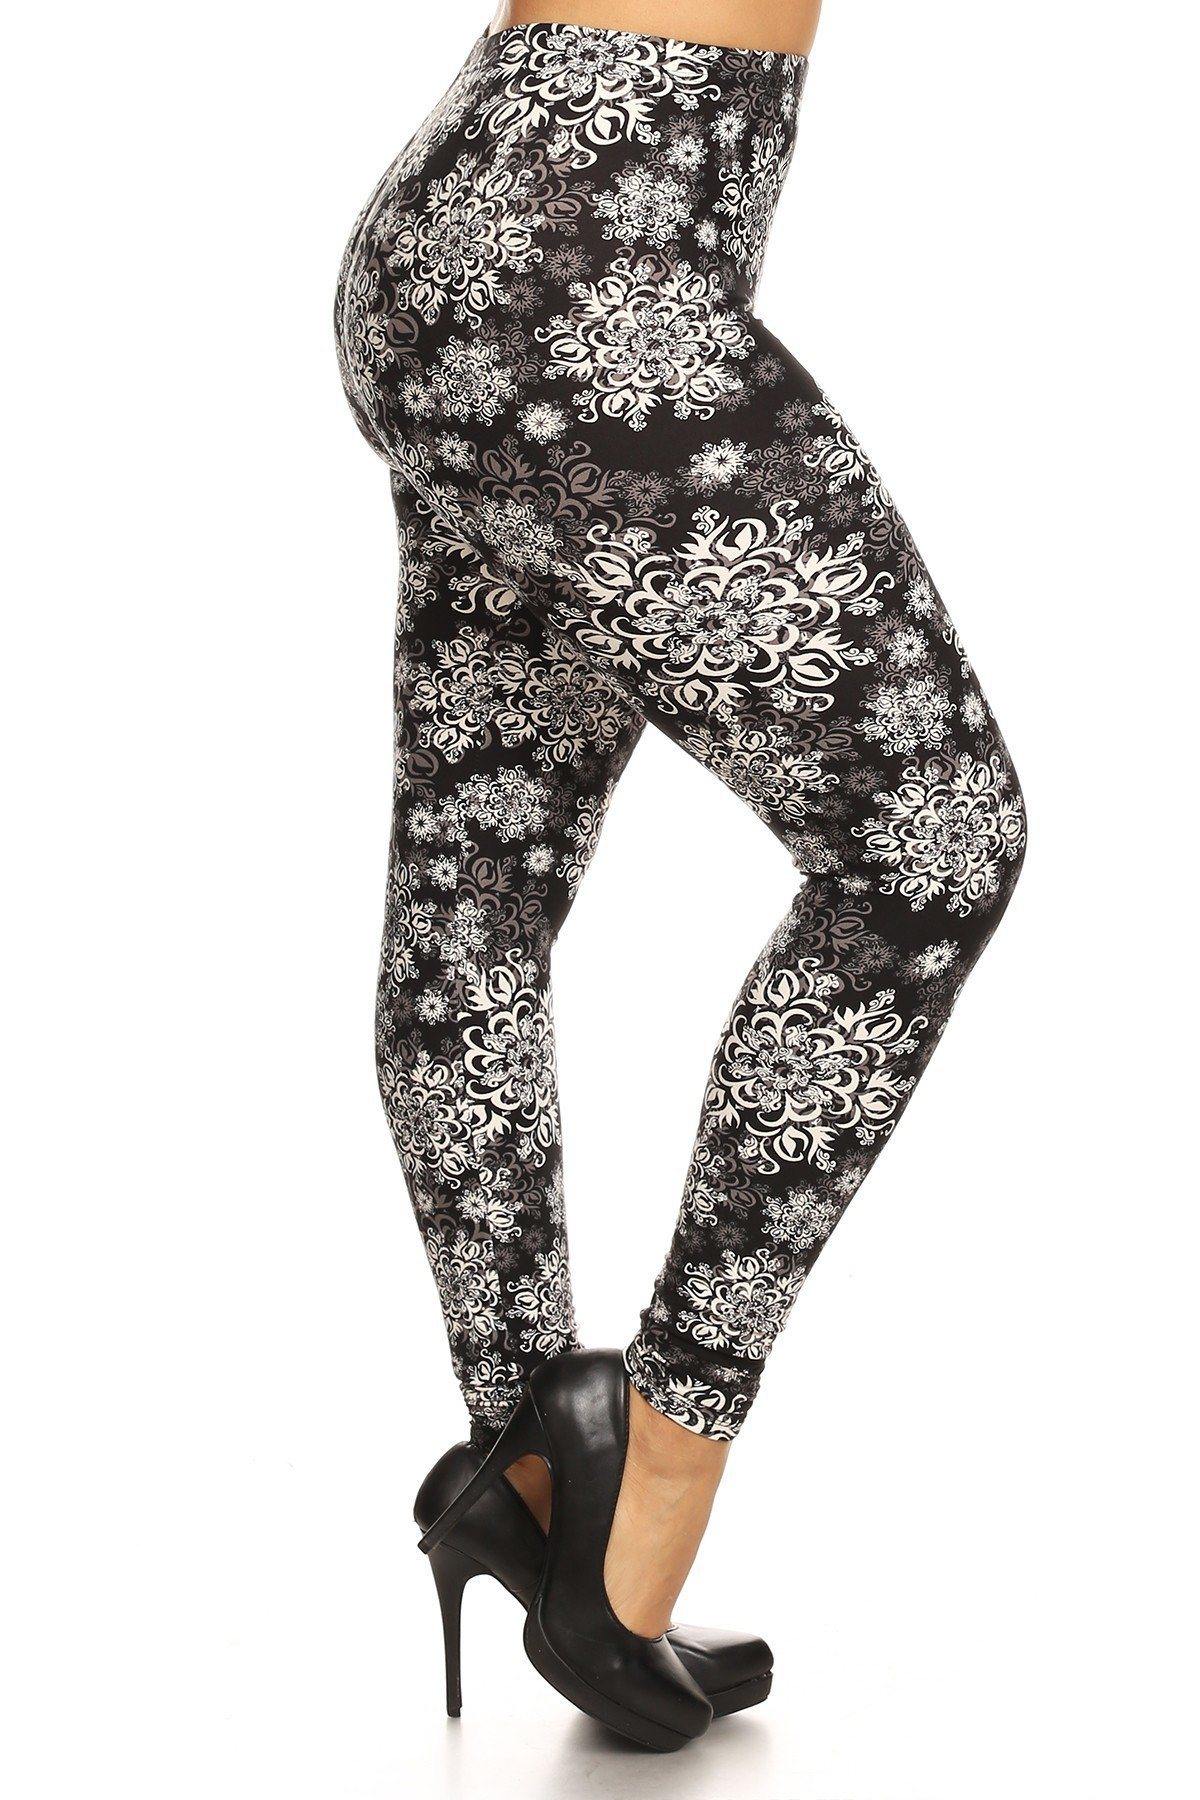 Plus Size Abstract Print, Full Length Leggings In A Slim Fitting Style With A Banded High Waist - Pearlara